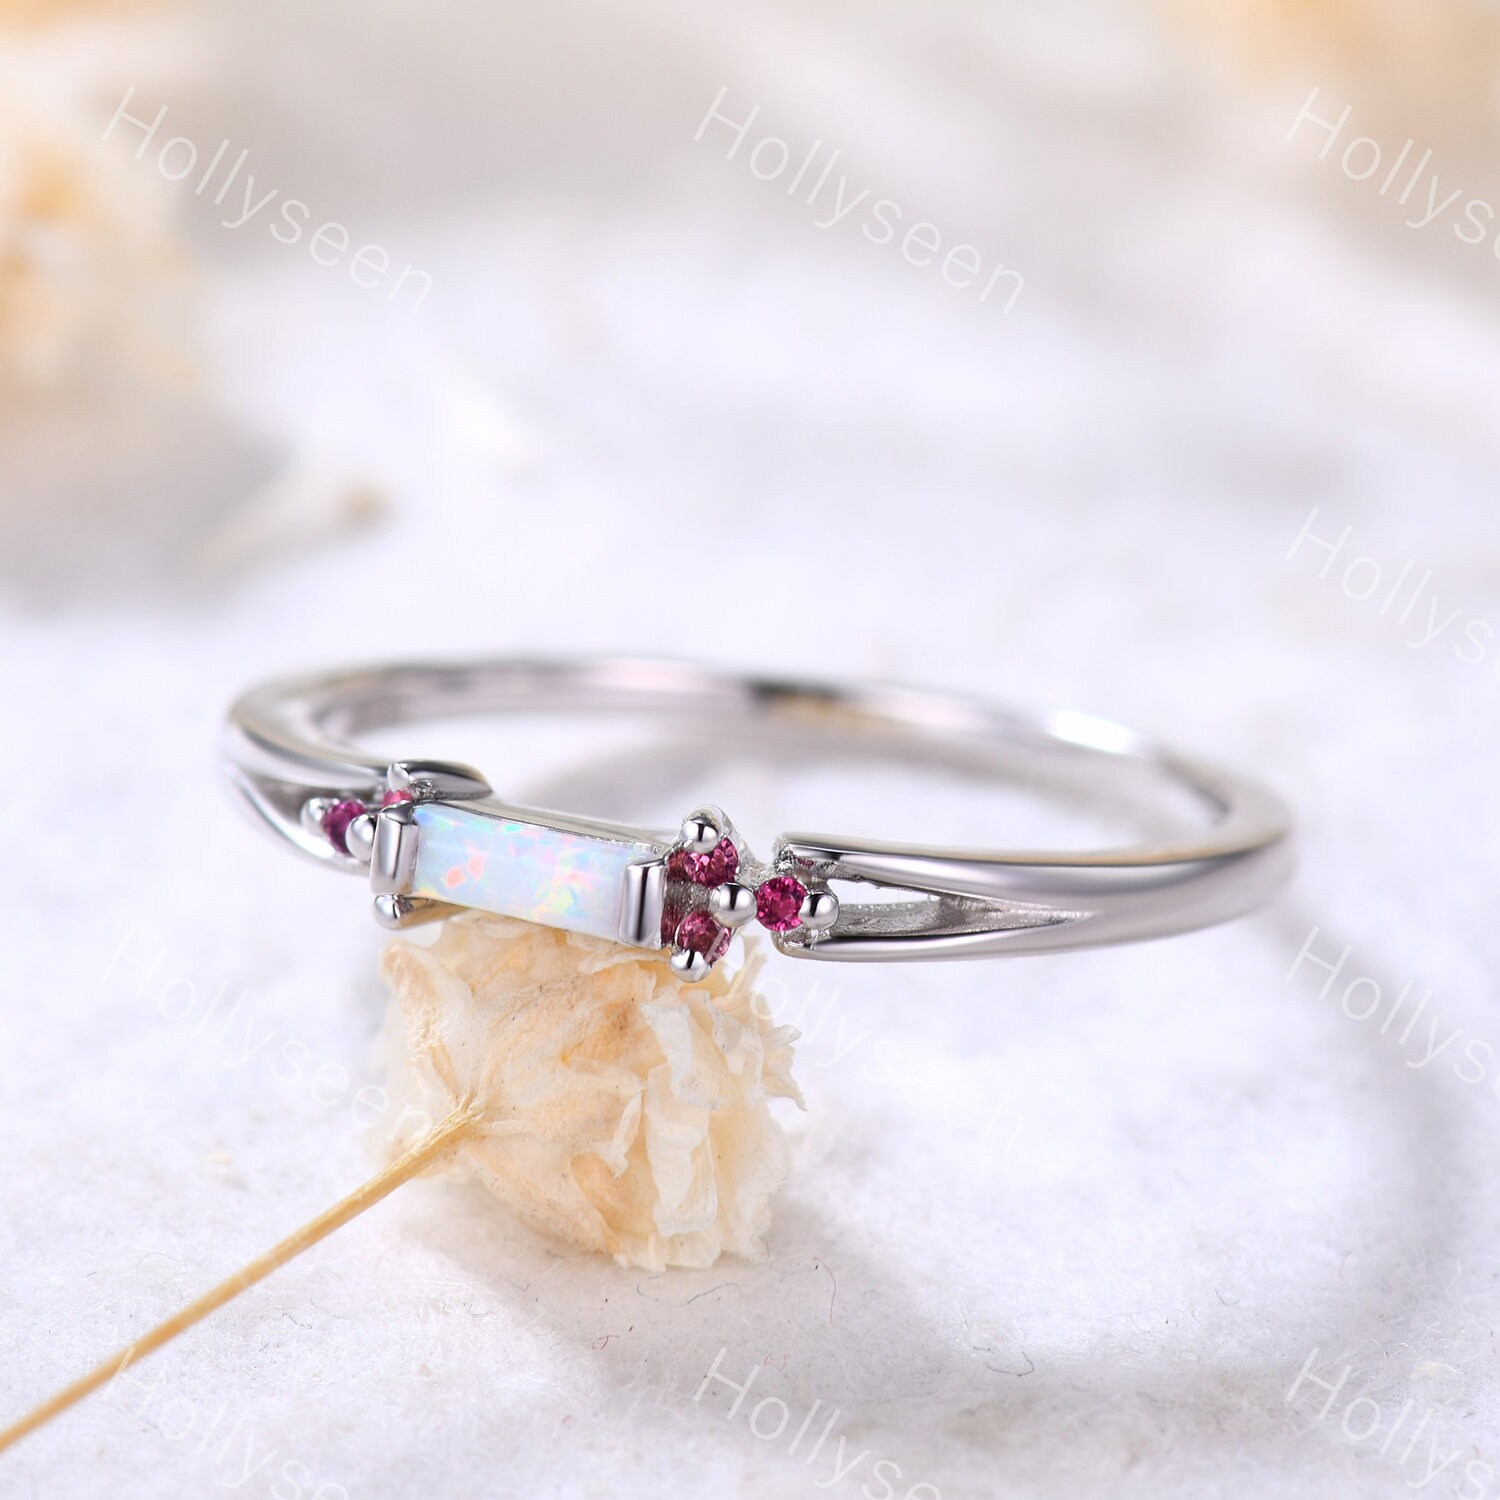 Art Deco Opal and Ruby Engagement Ring 14k Gold Opal Engagement Ring Vintage Opal Wedding Ring Three Gemstone Ring Unique Opal Bridal Ring